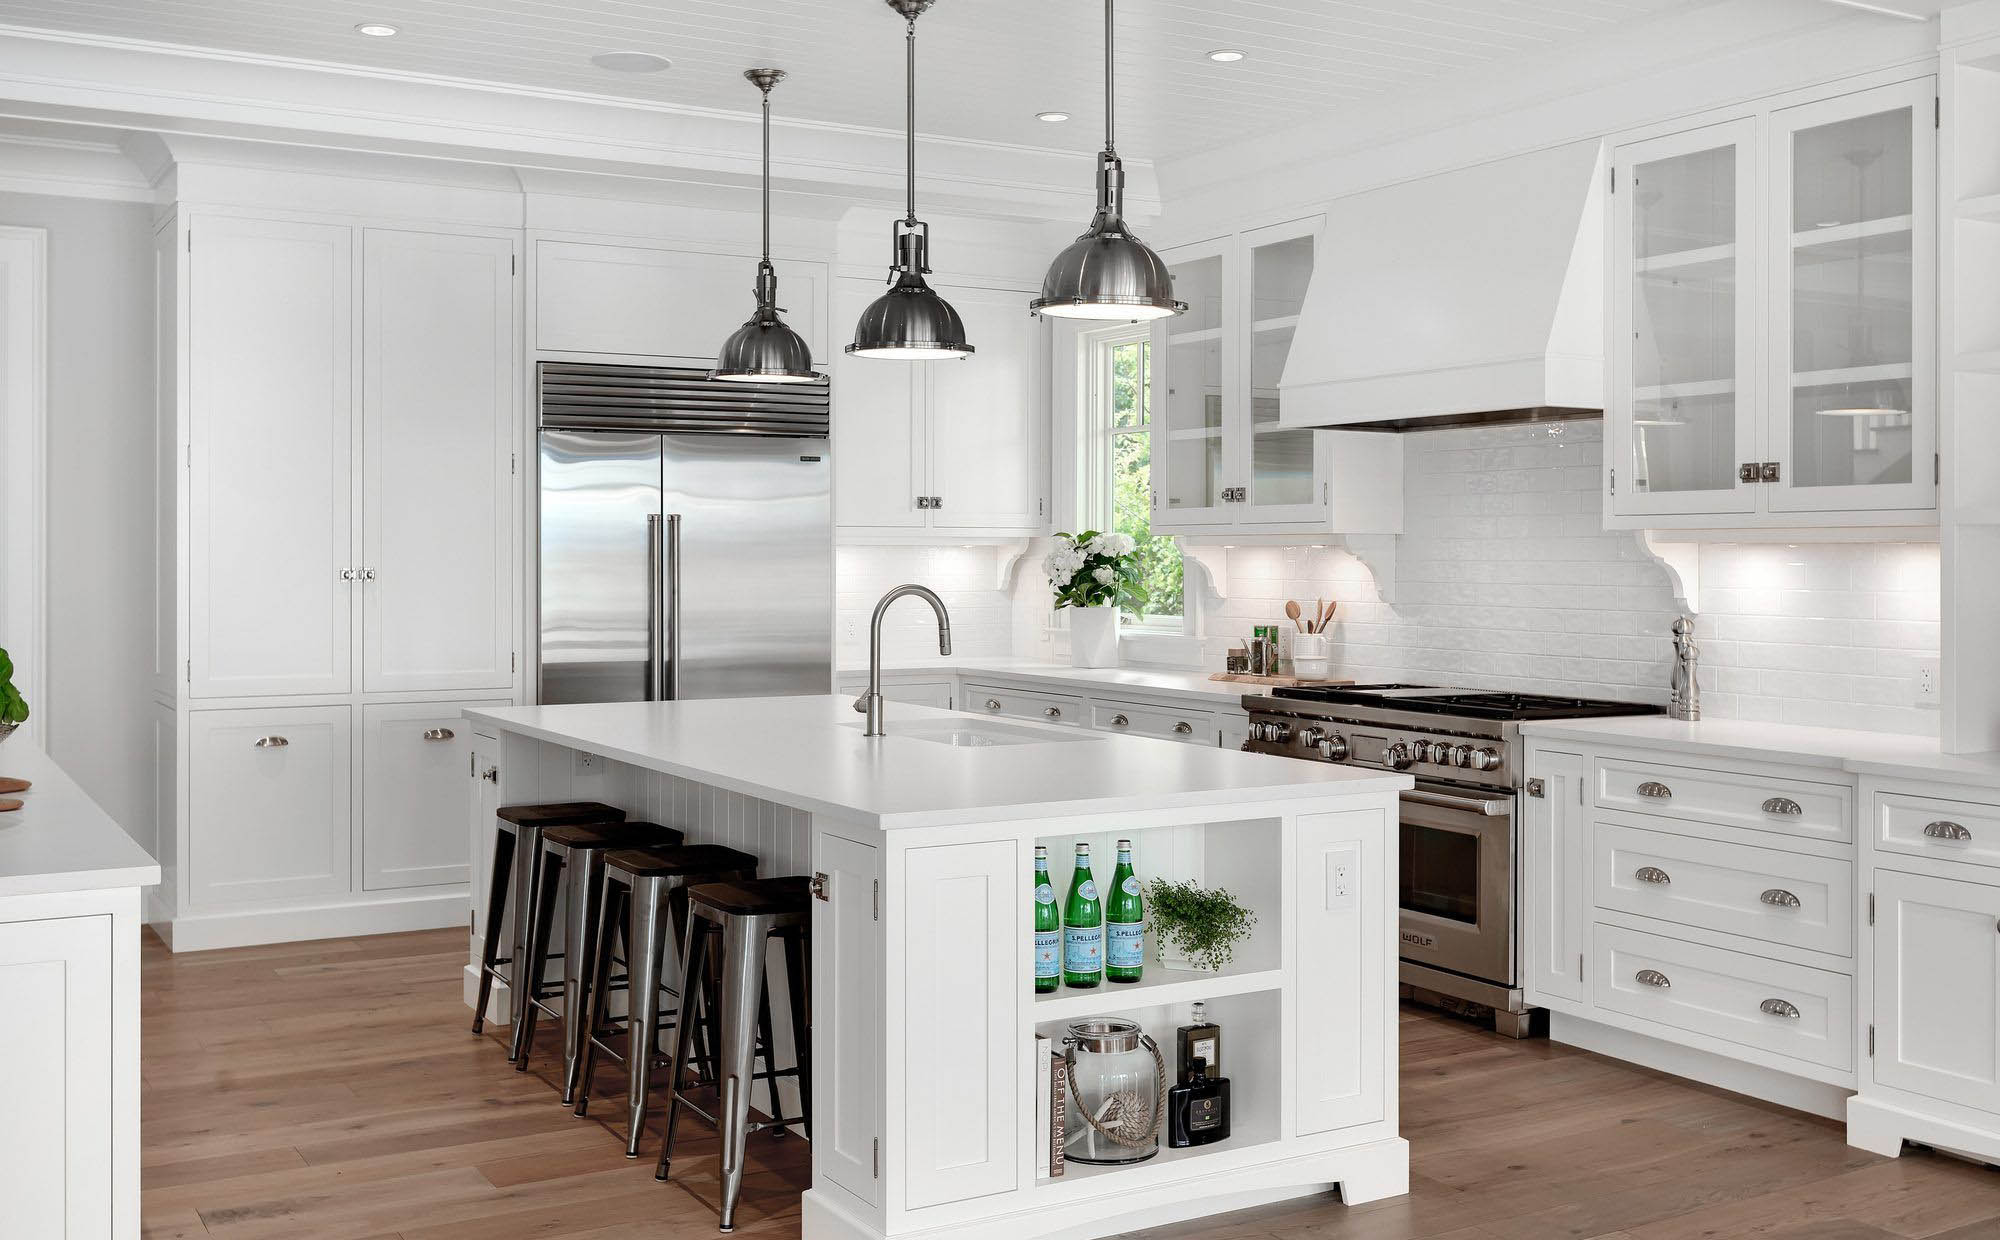 Luxury kitchen with a light knotty pine wood look flooring tile. White cabinets with white countertops.